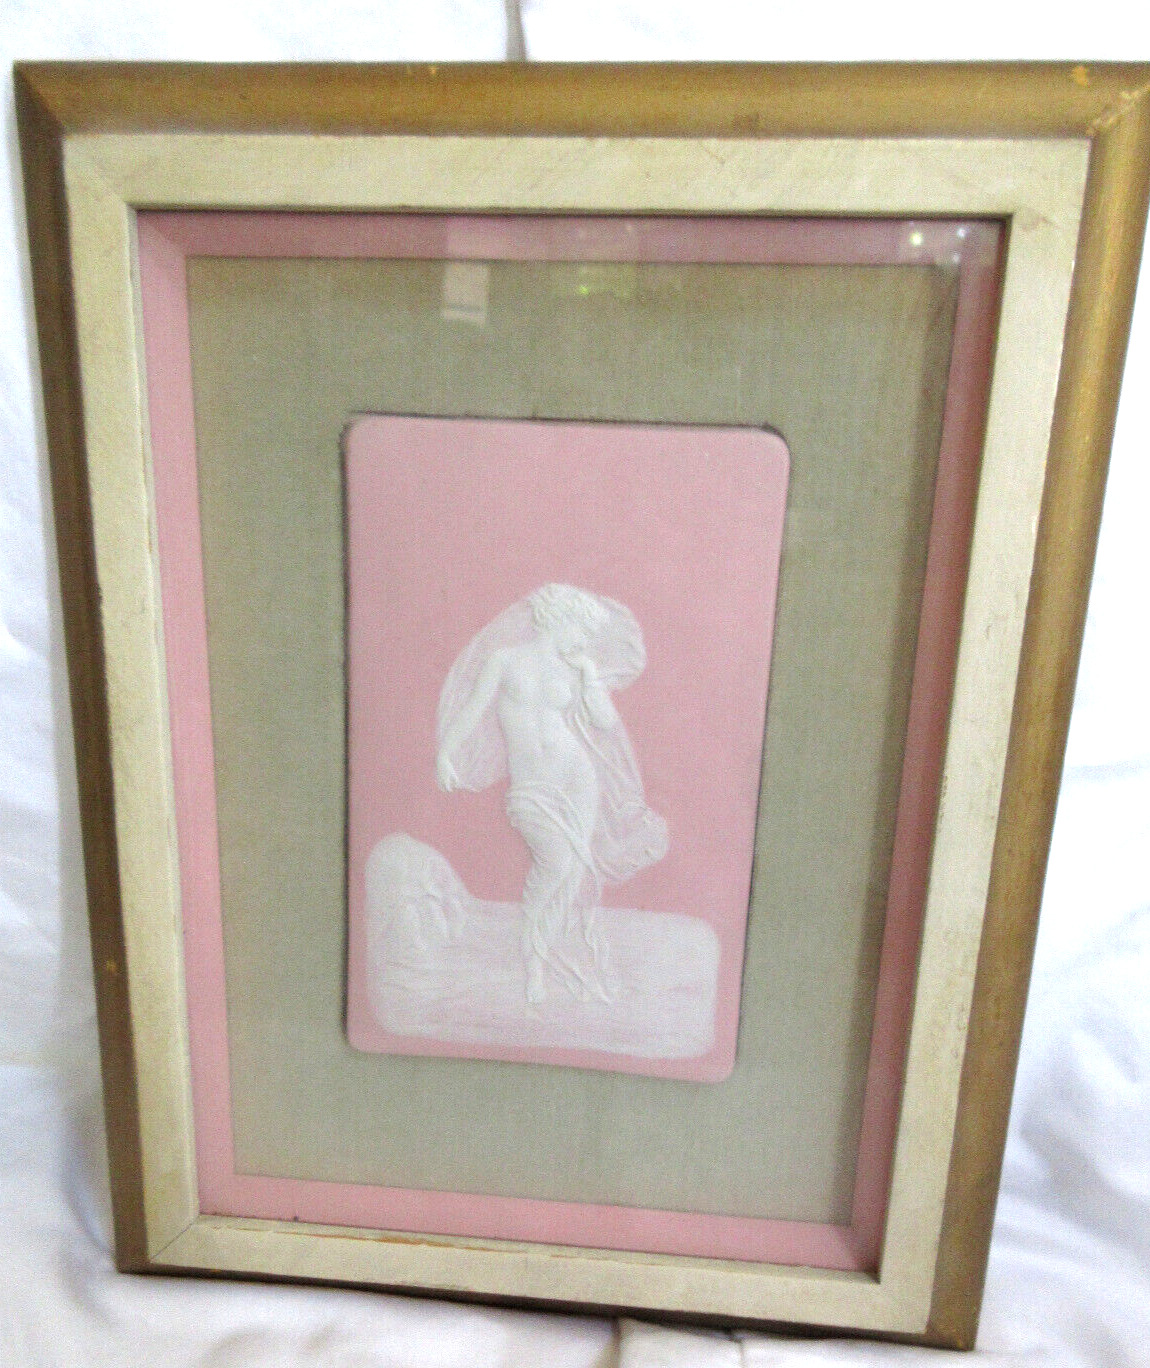 Gorgeous Camille Tharaud Limoges Pate sur Pat Plaque Relief Framed